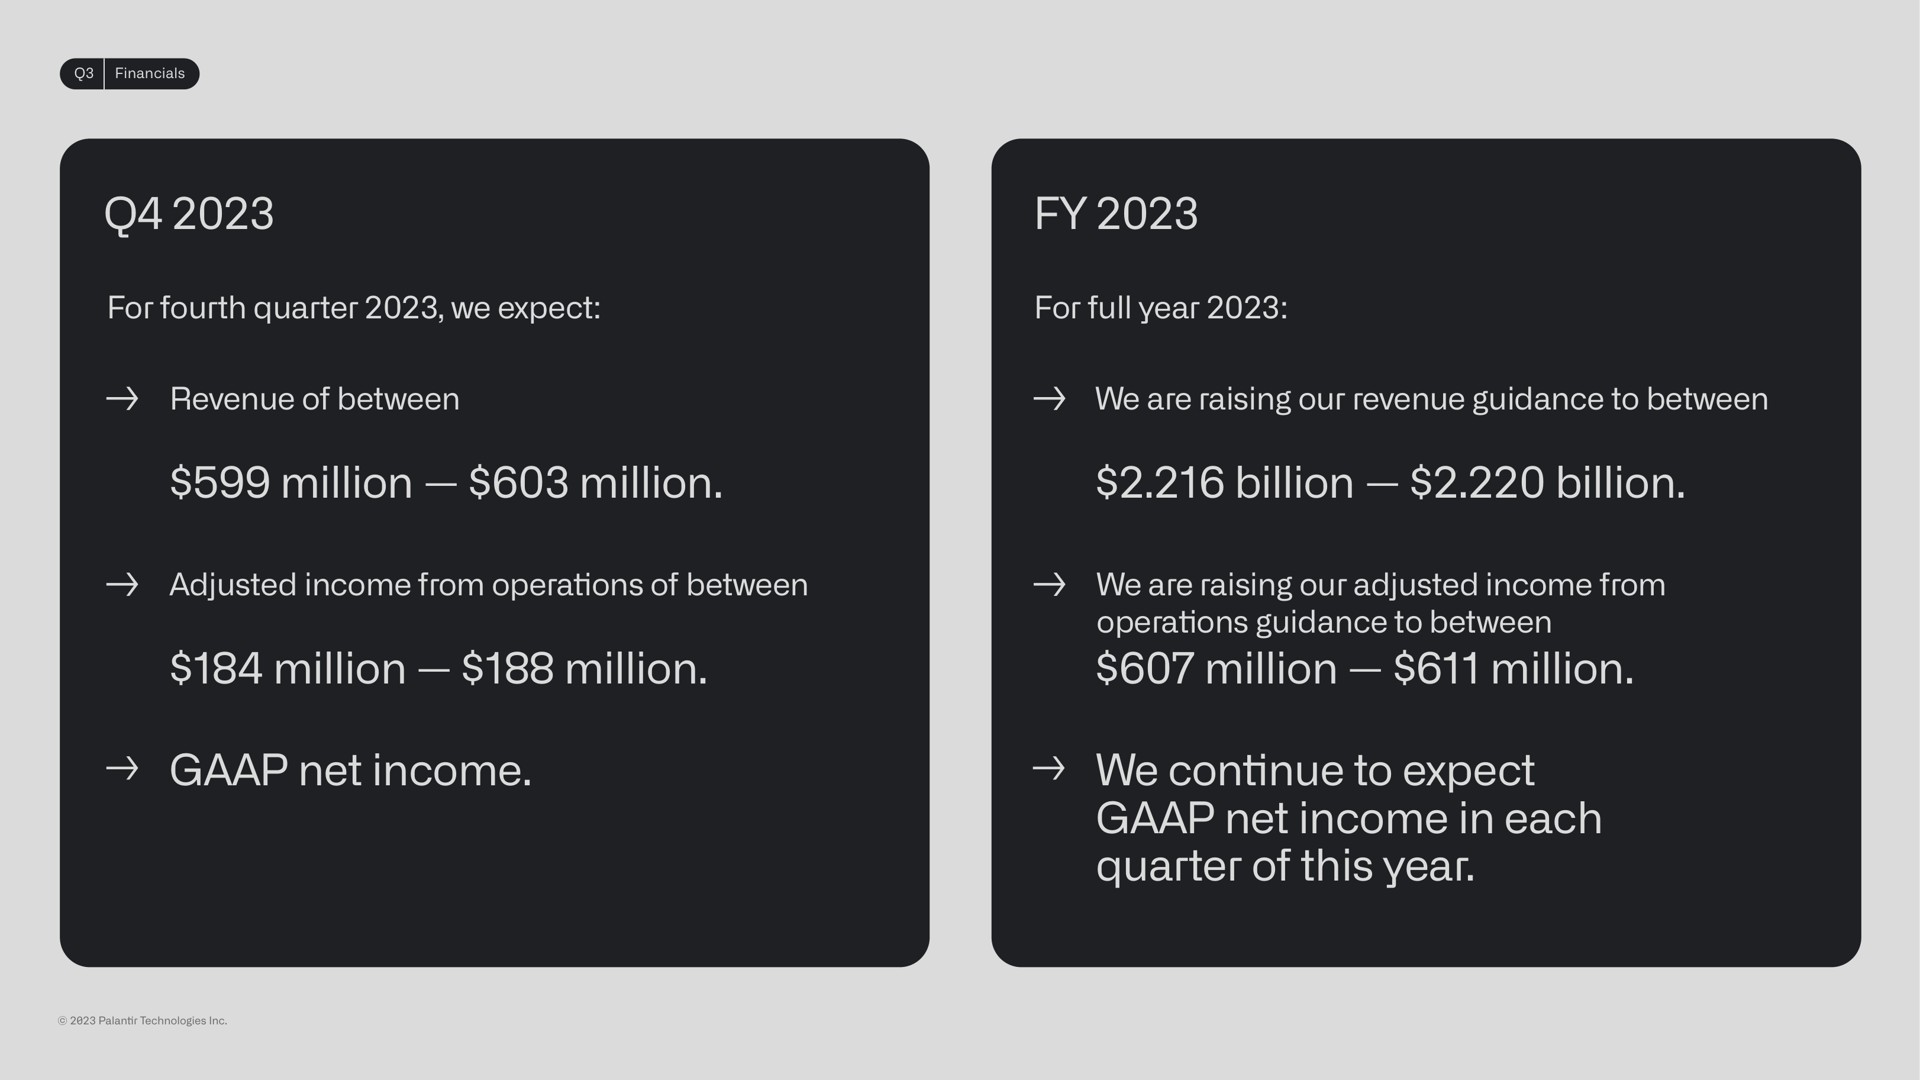 million million billion billion million million million million net income we continue to expect net income in each quarter of this year | Palantir